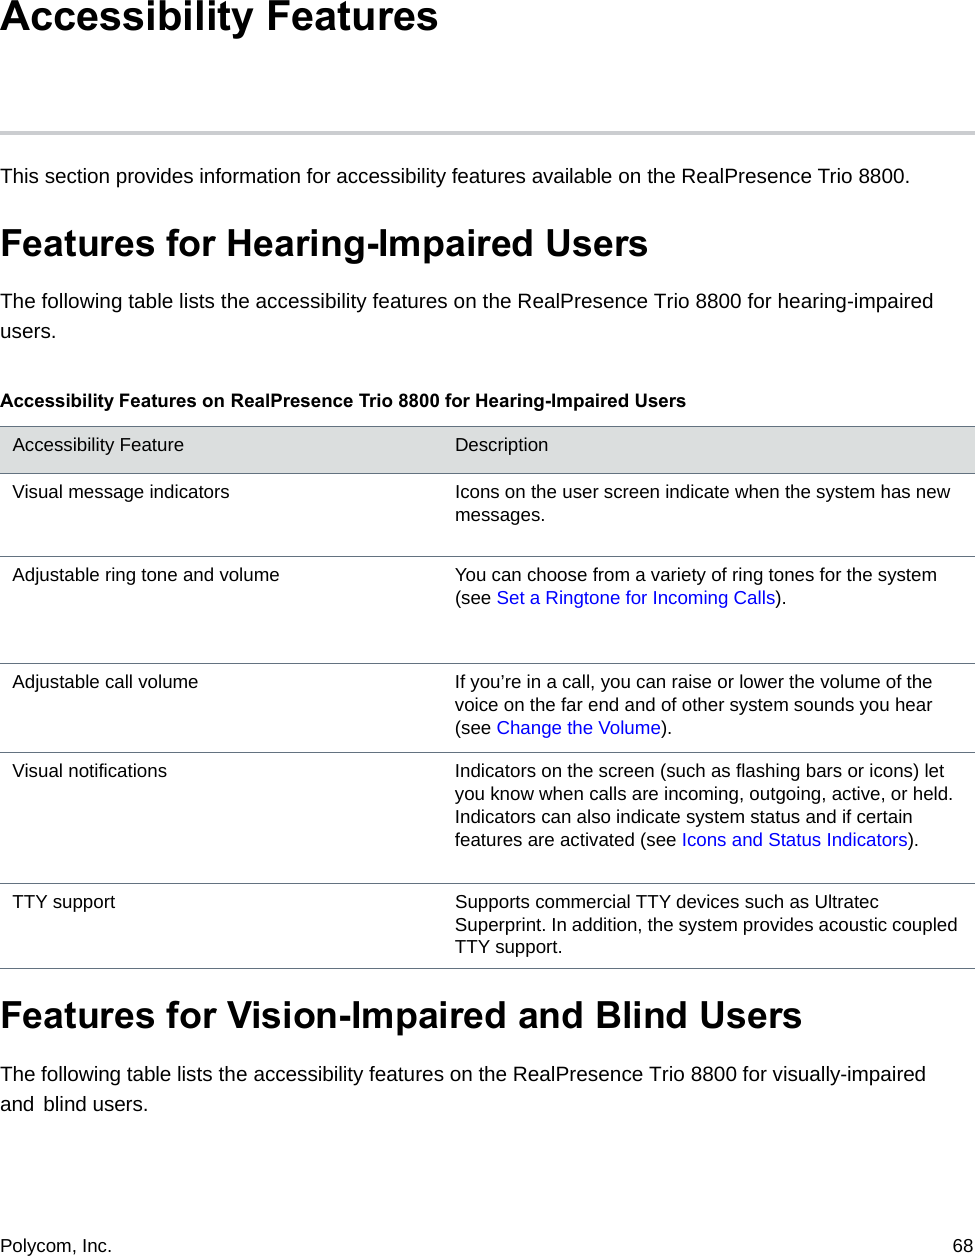 Polycom, Inc.  68 Accessibility Features This section provides information for accessibility features available on the RealPresence Trio 8800.Features for Hearing-Impaired UsersThe following table lists the accessibility features on the RealPresence Trio 8800 for hearing-impaired users.Features for Vision-Impaired and Blind Users The following table lists the accessibility features on the RealPresence Trio 8800 for visually-impaired and blind users.Accessibility Features on RealPresence Trio 8800 for Hearing-Impaired UsersAccessibility Feature DescriptionVisual message indicators Icons on the user screen indicate when the system has new messages.Adjustable ring tone and volume You can choose from a variety of ring tones for the system (see Set a Ringtone for Incoming Calls).Adjustable call volume If you’re in a call, you can raise or lower the volume of the voice on the far end and of other system sounds you hear (see Change the Volume).Visual notifications Indicators on the screen (such as flashing bars or icons) let you know when calls are incoming, outgoing, active, or held. Indicators can also indicate system status and if certain features are activated (see Icons and Status Indicators).TTY support Supports commercial TTY devices such as Ultratec Superprint. In addition, the system provides acoustic coupled TTY support.